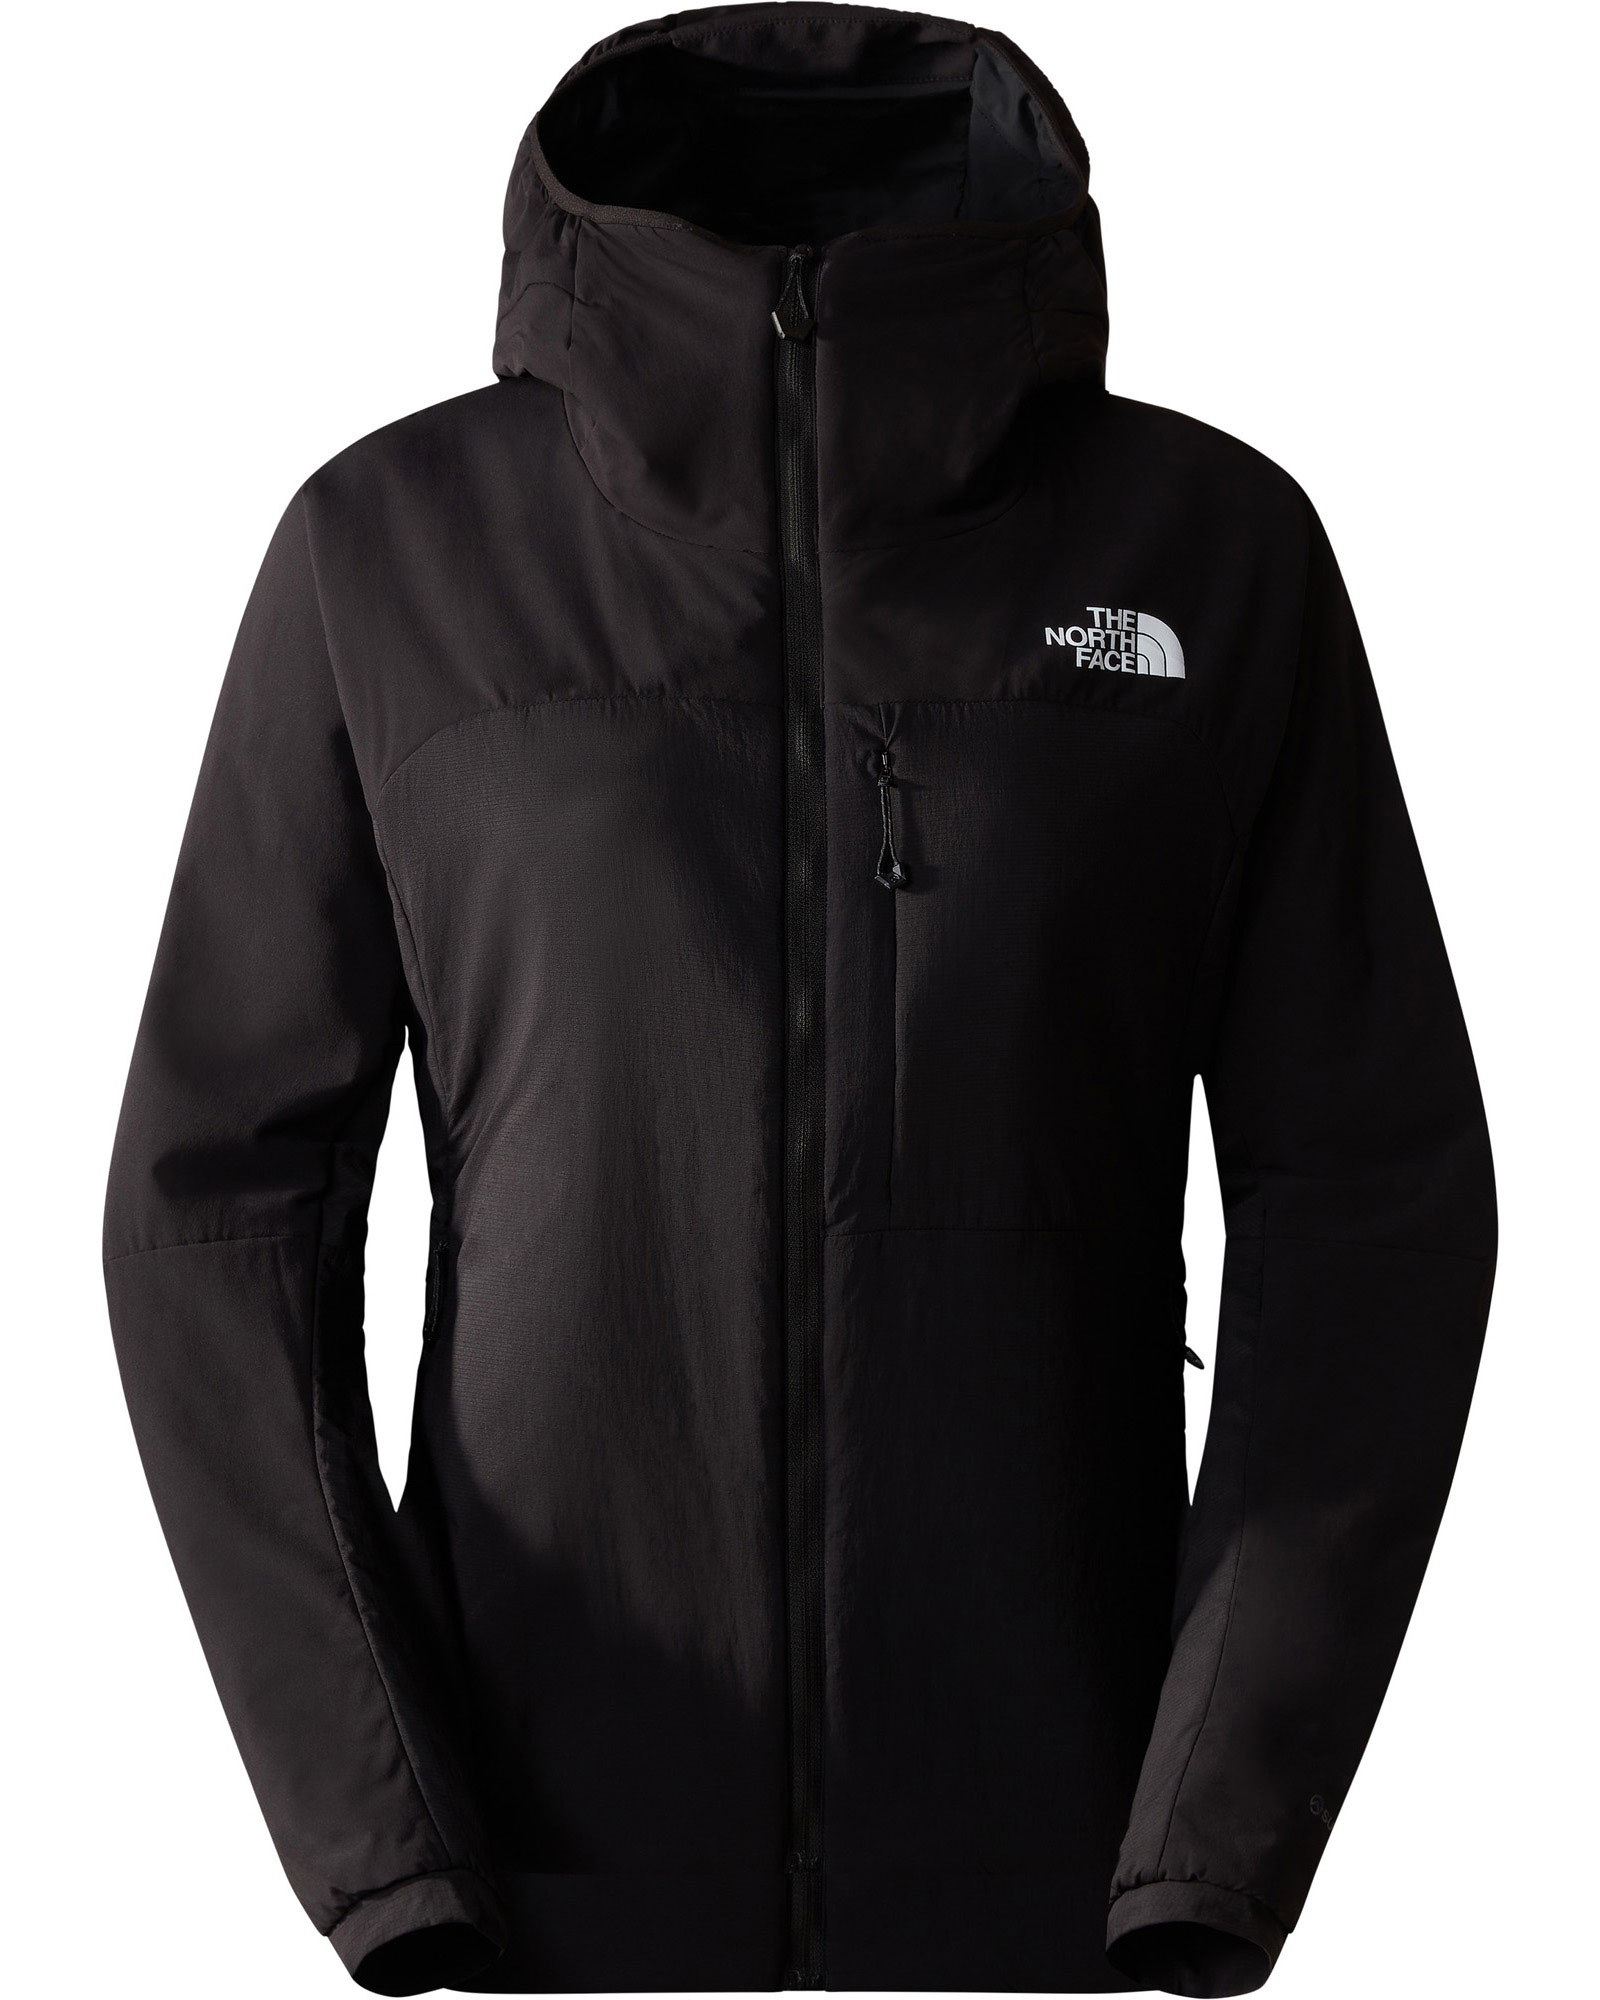 The North Face Summit Casaval Women’s Hoodie - TNF Black S